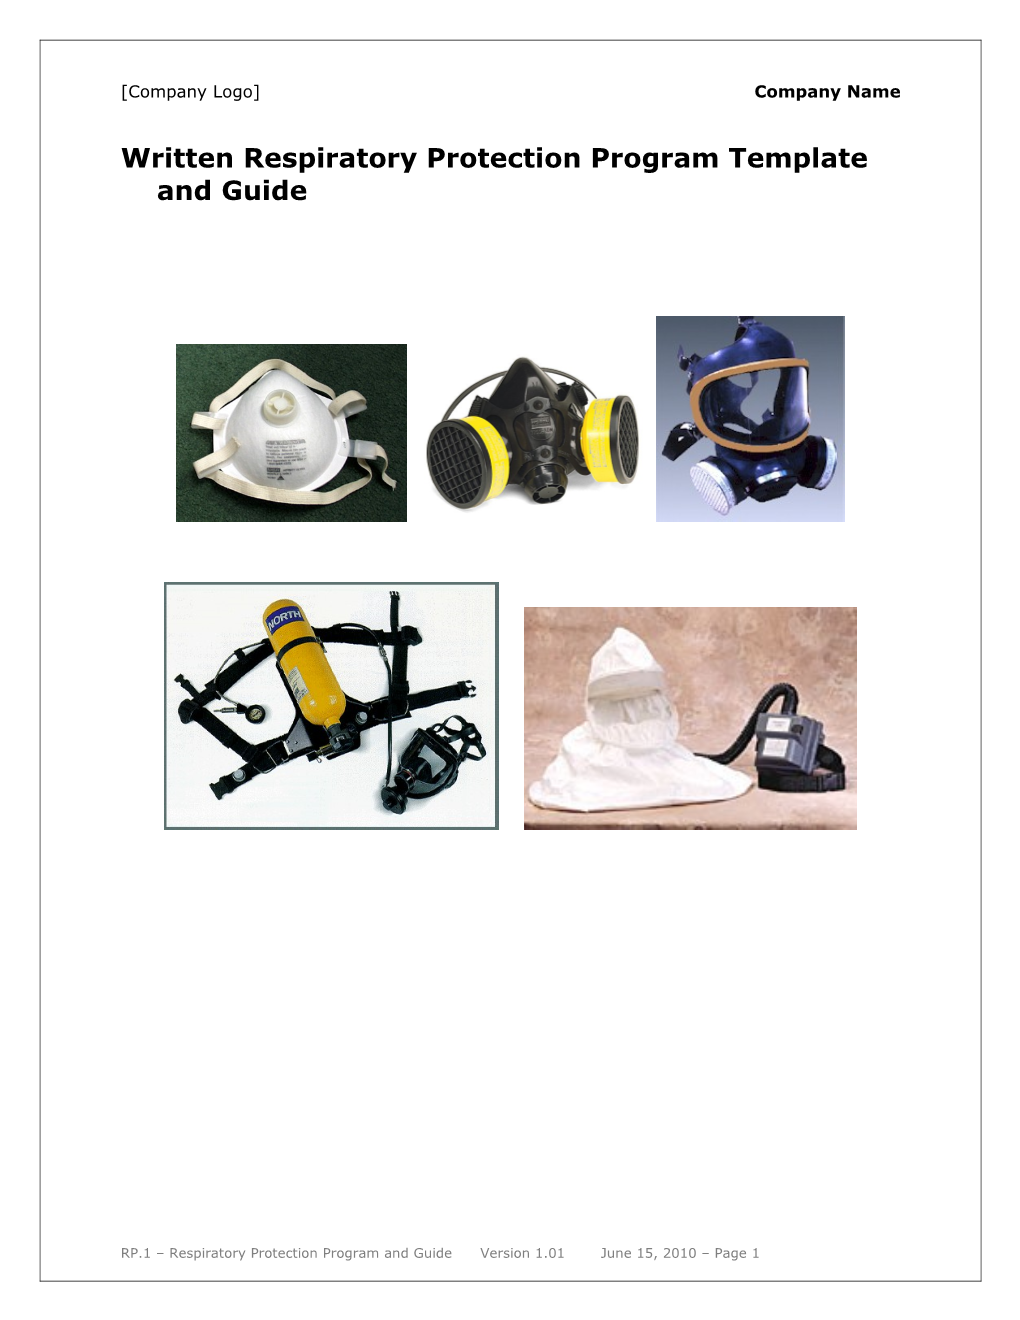 Written Respiratory Protection Program Template and Guide